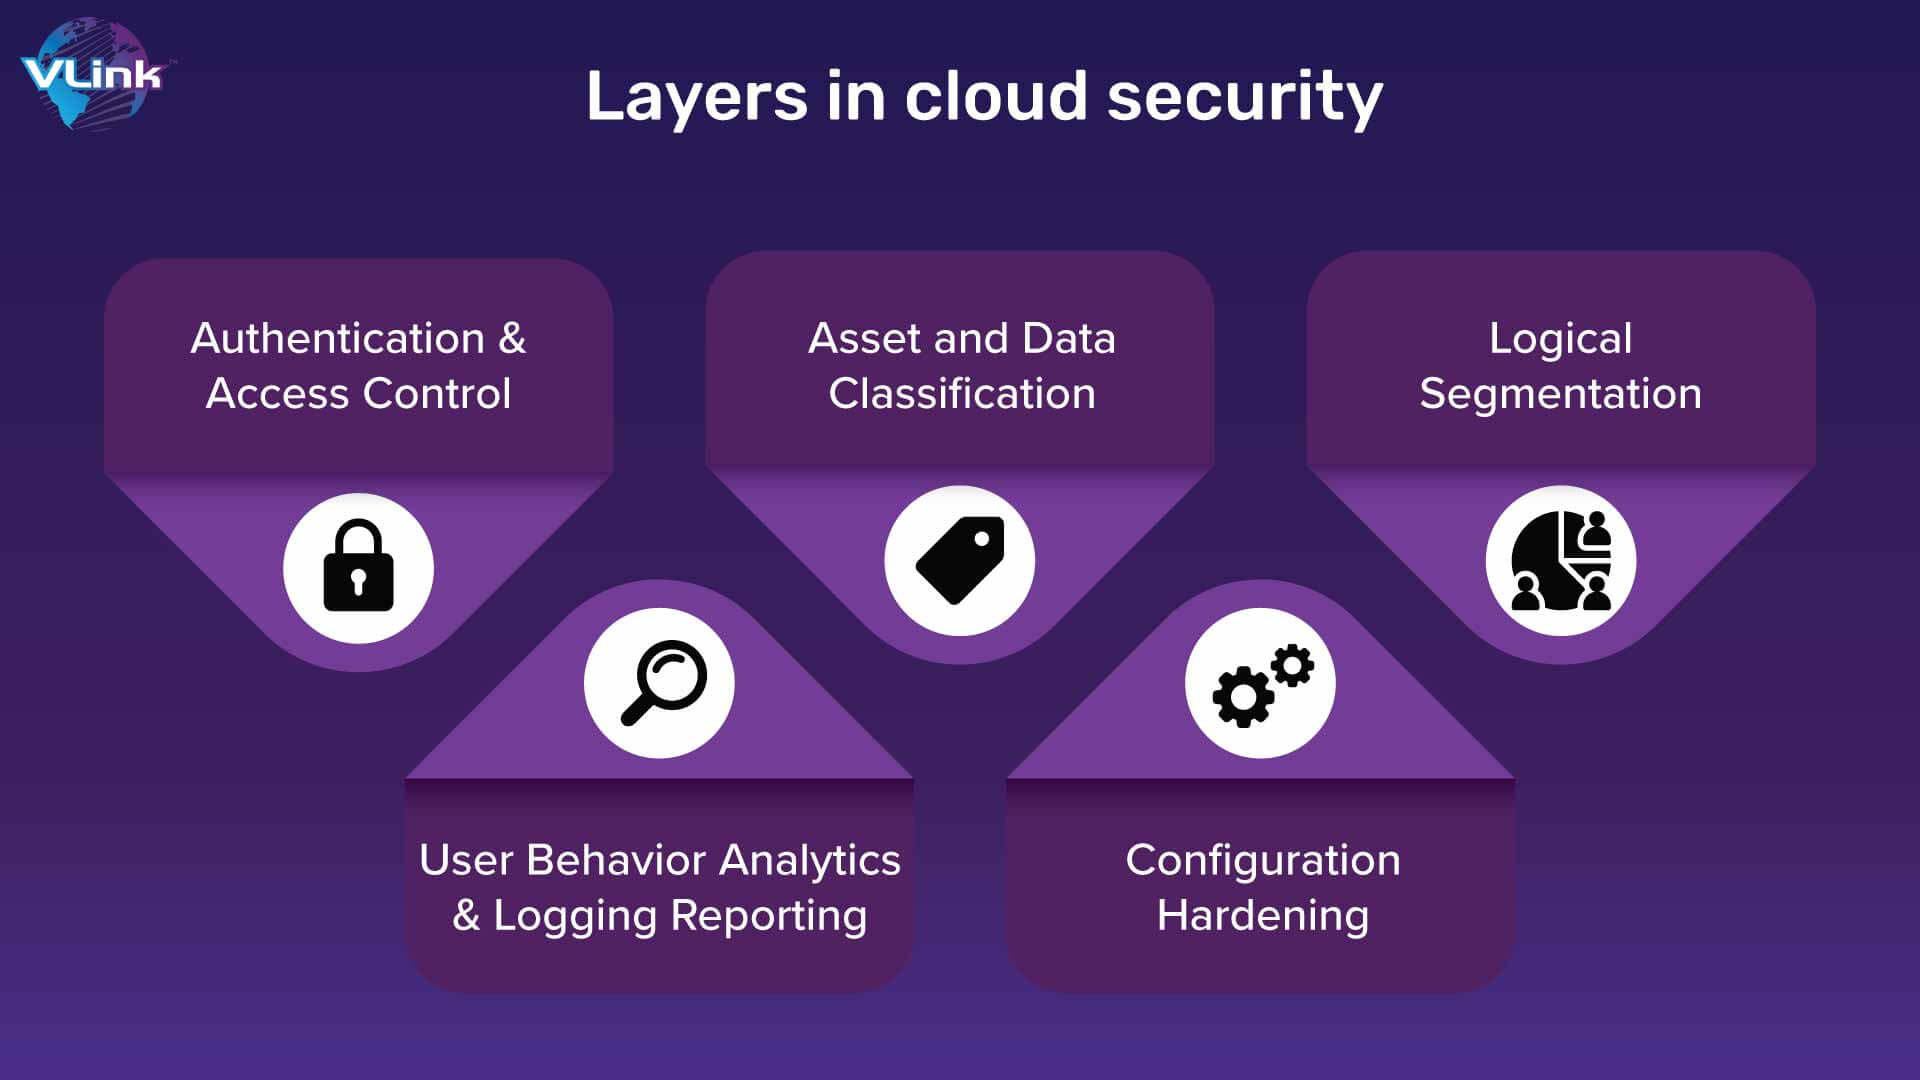 Layers in cloud security